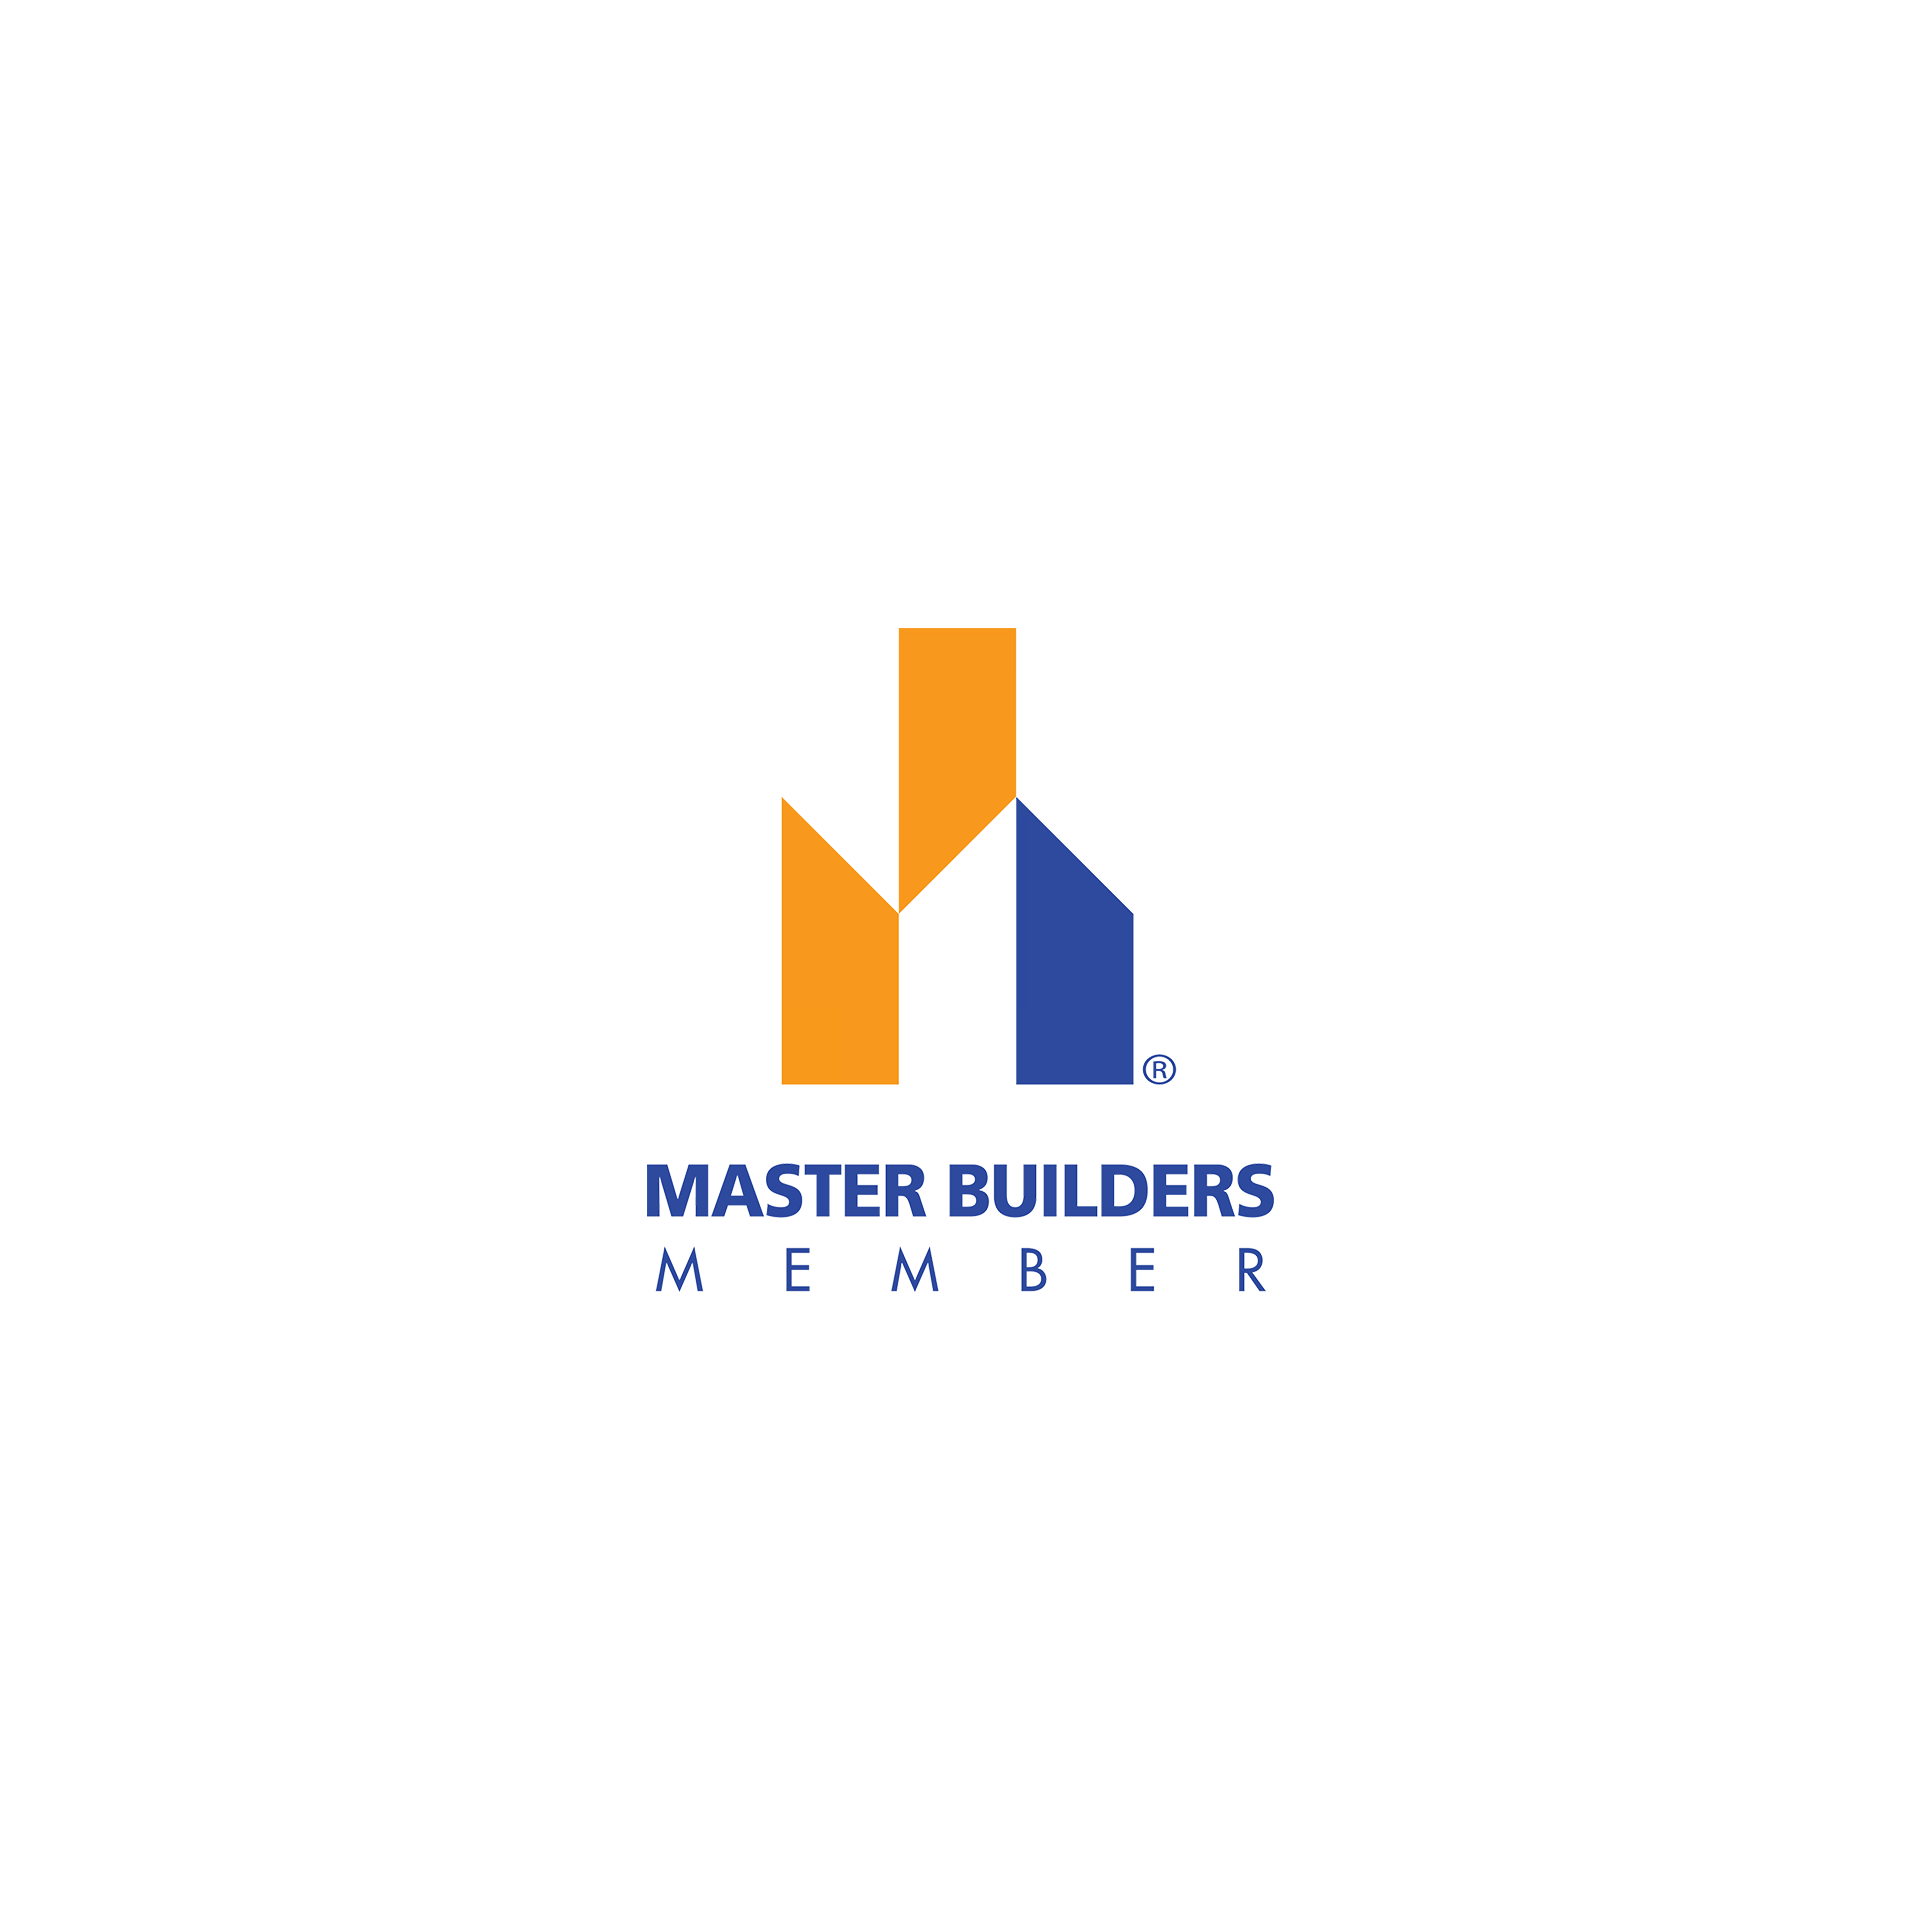 A logo for a company called master builders member